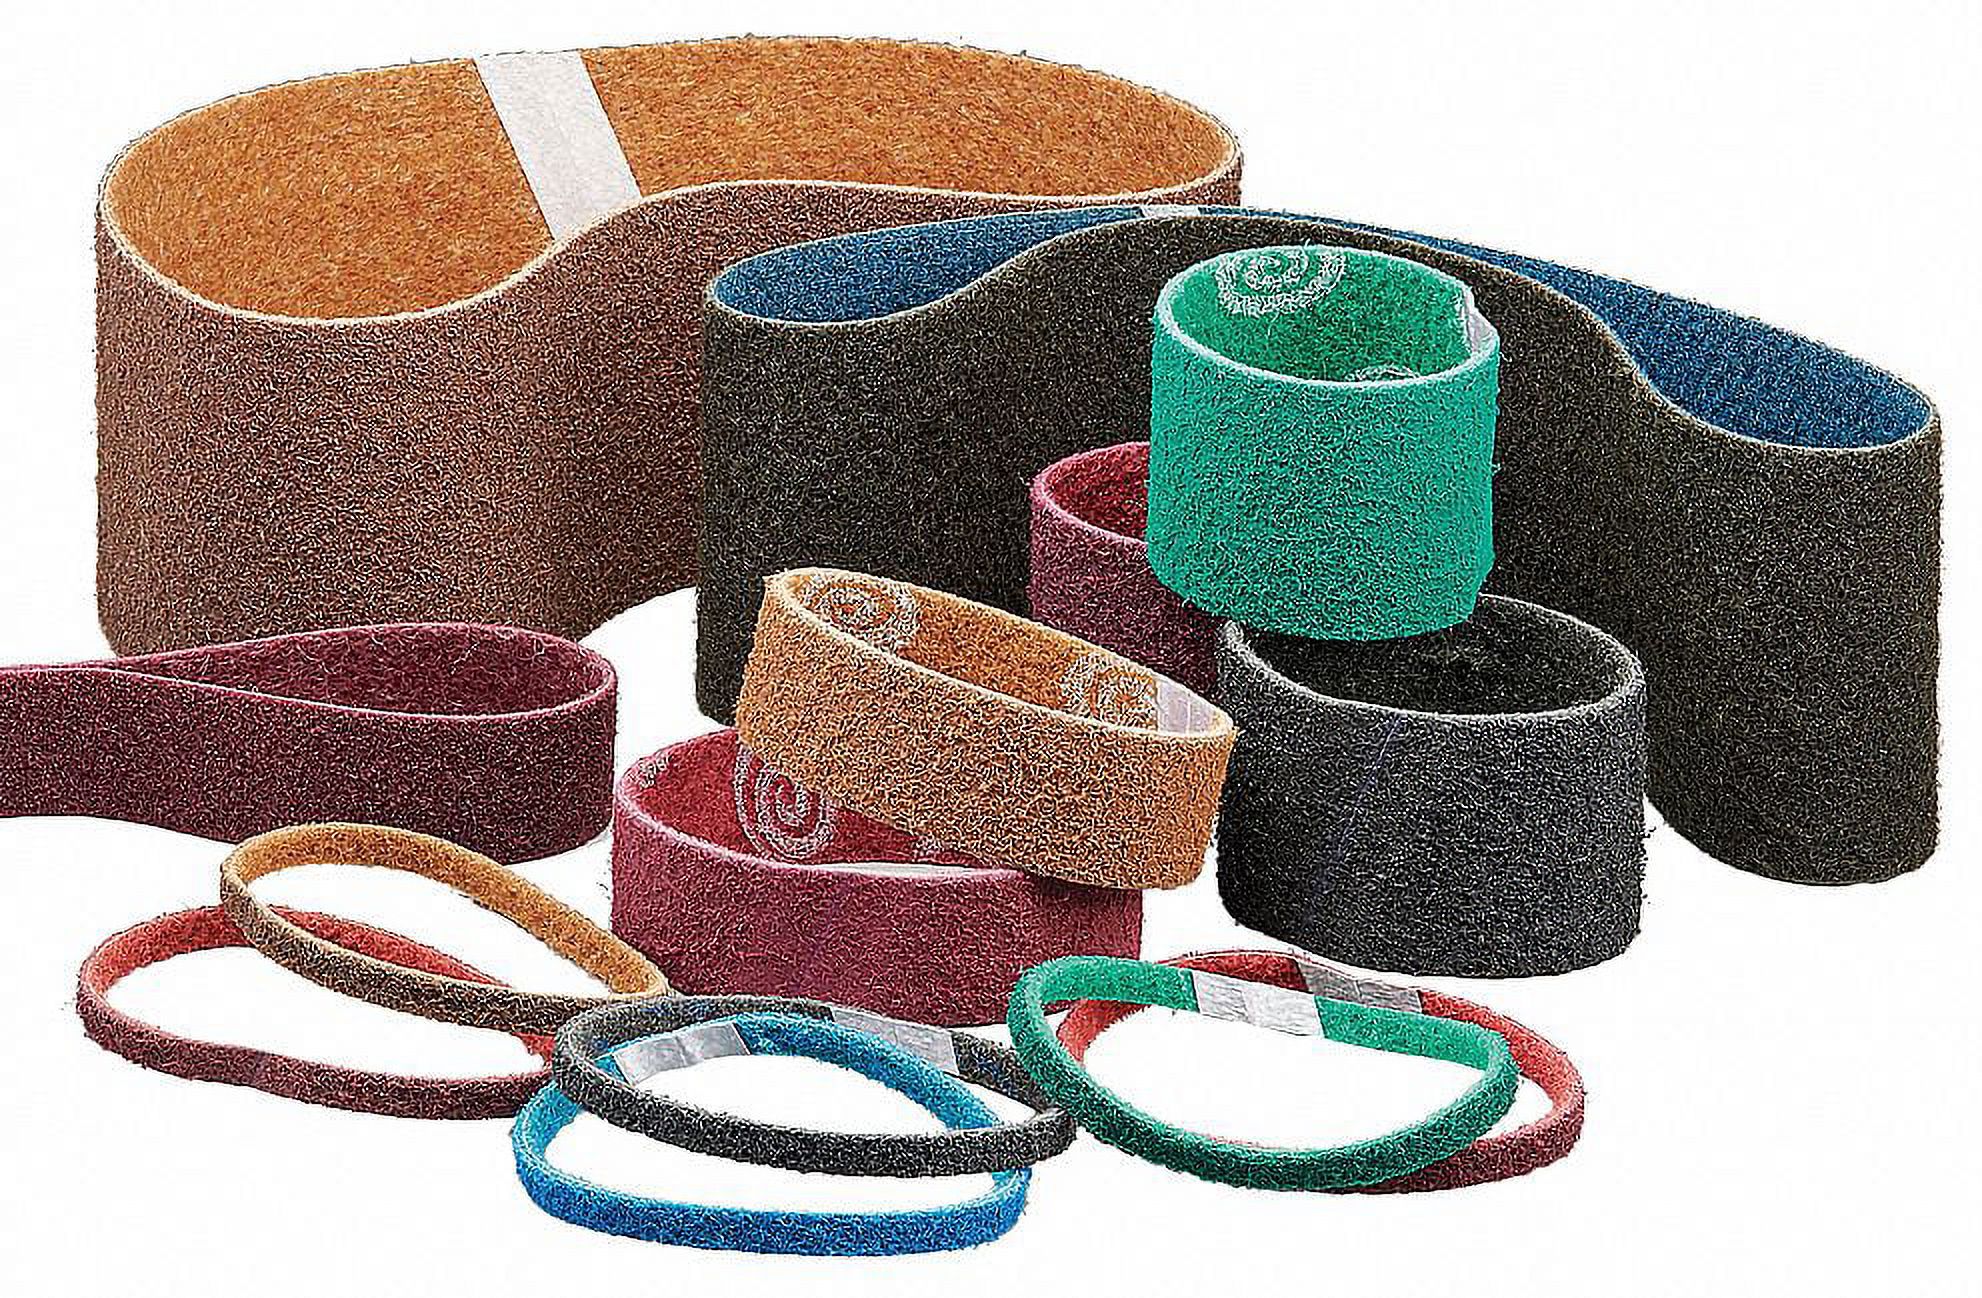 Norton Abrasives Surface-Conditioning Belt,42 in L,1 in W  66623333521 - image 1 of 1